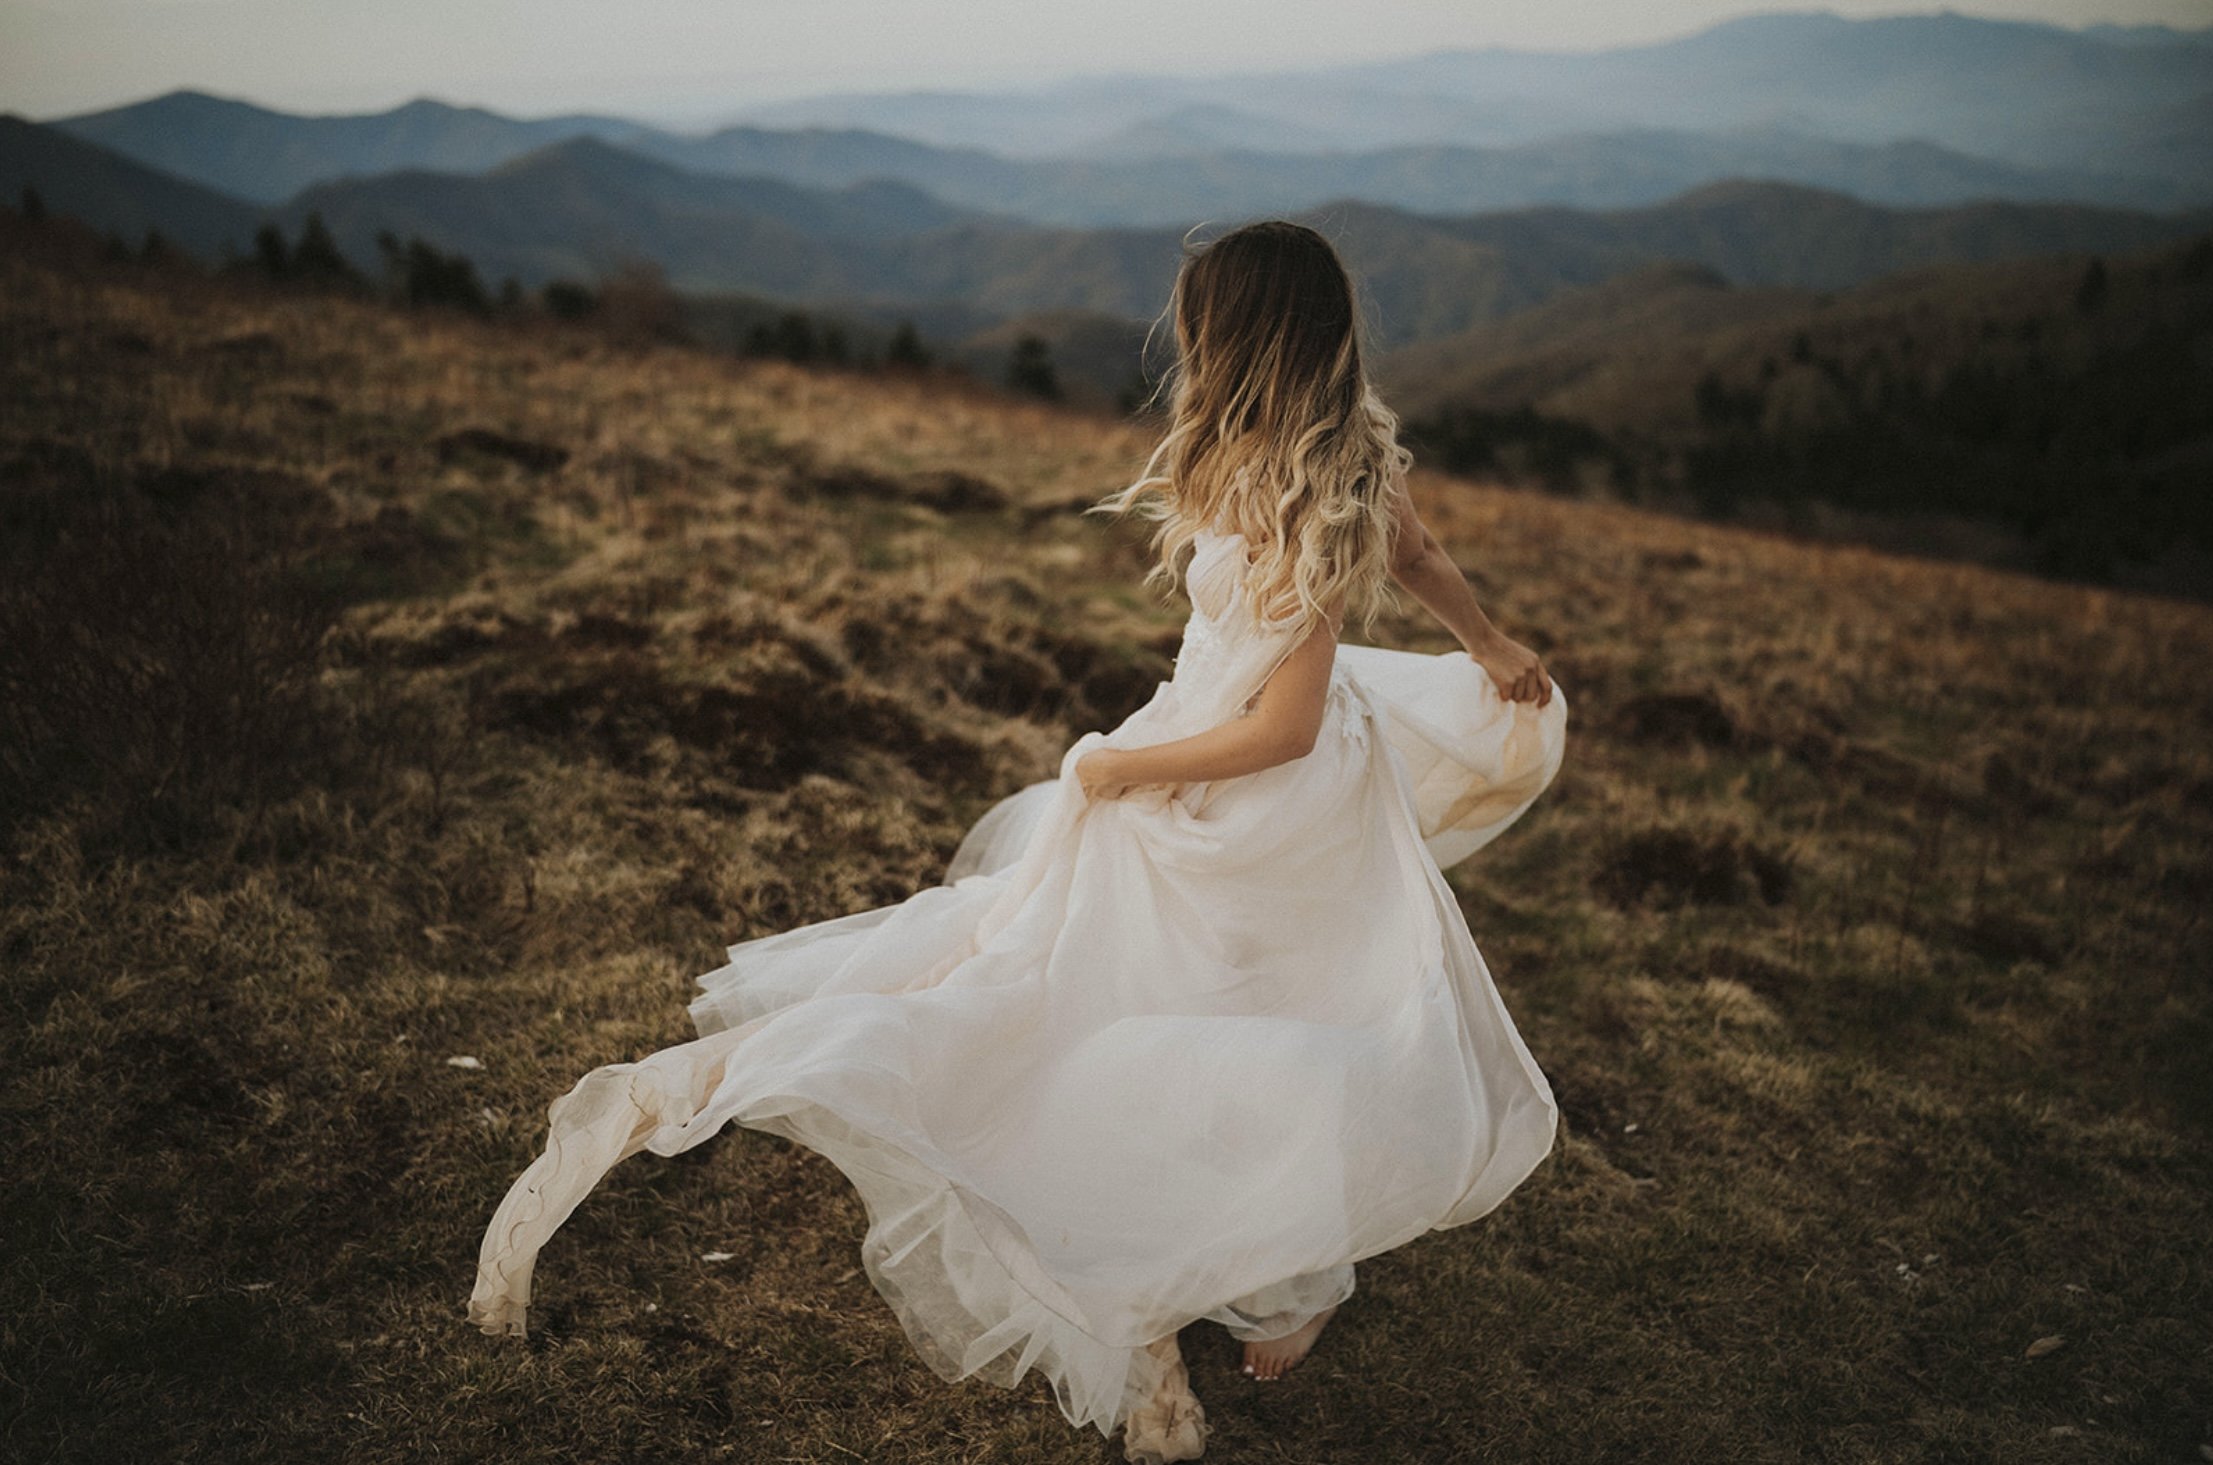   Heidi wedding dress . Elopement in Roan Mountain, Tennessee. Photo by  Hannah Murray Photography.   